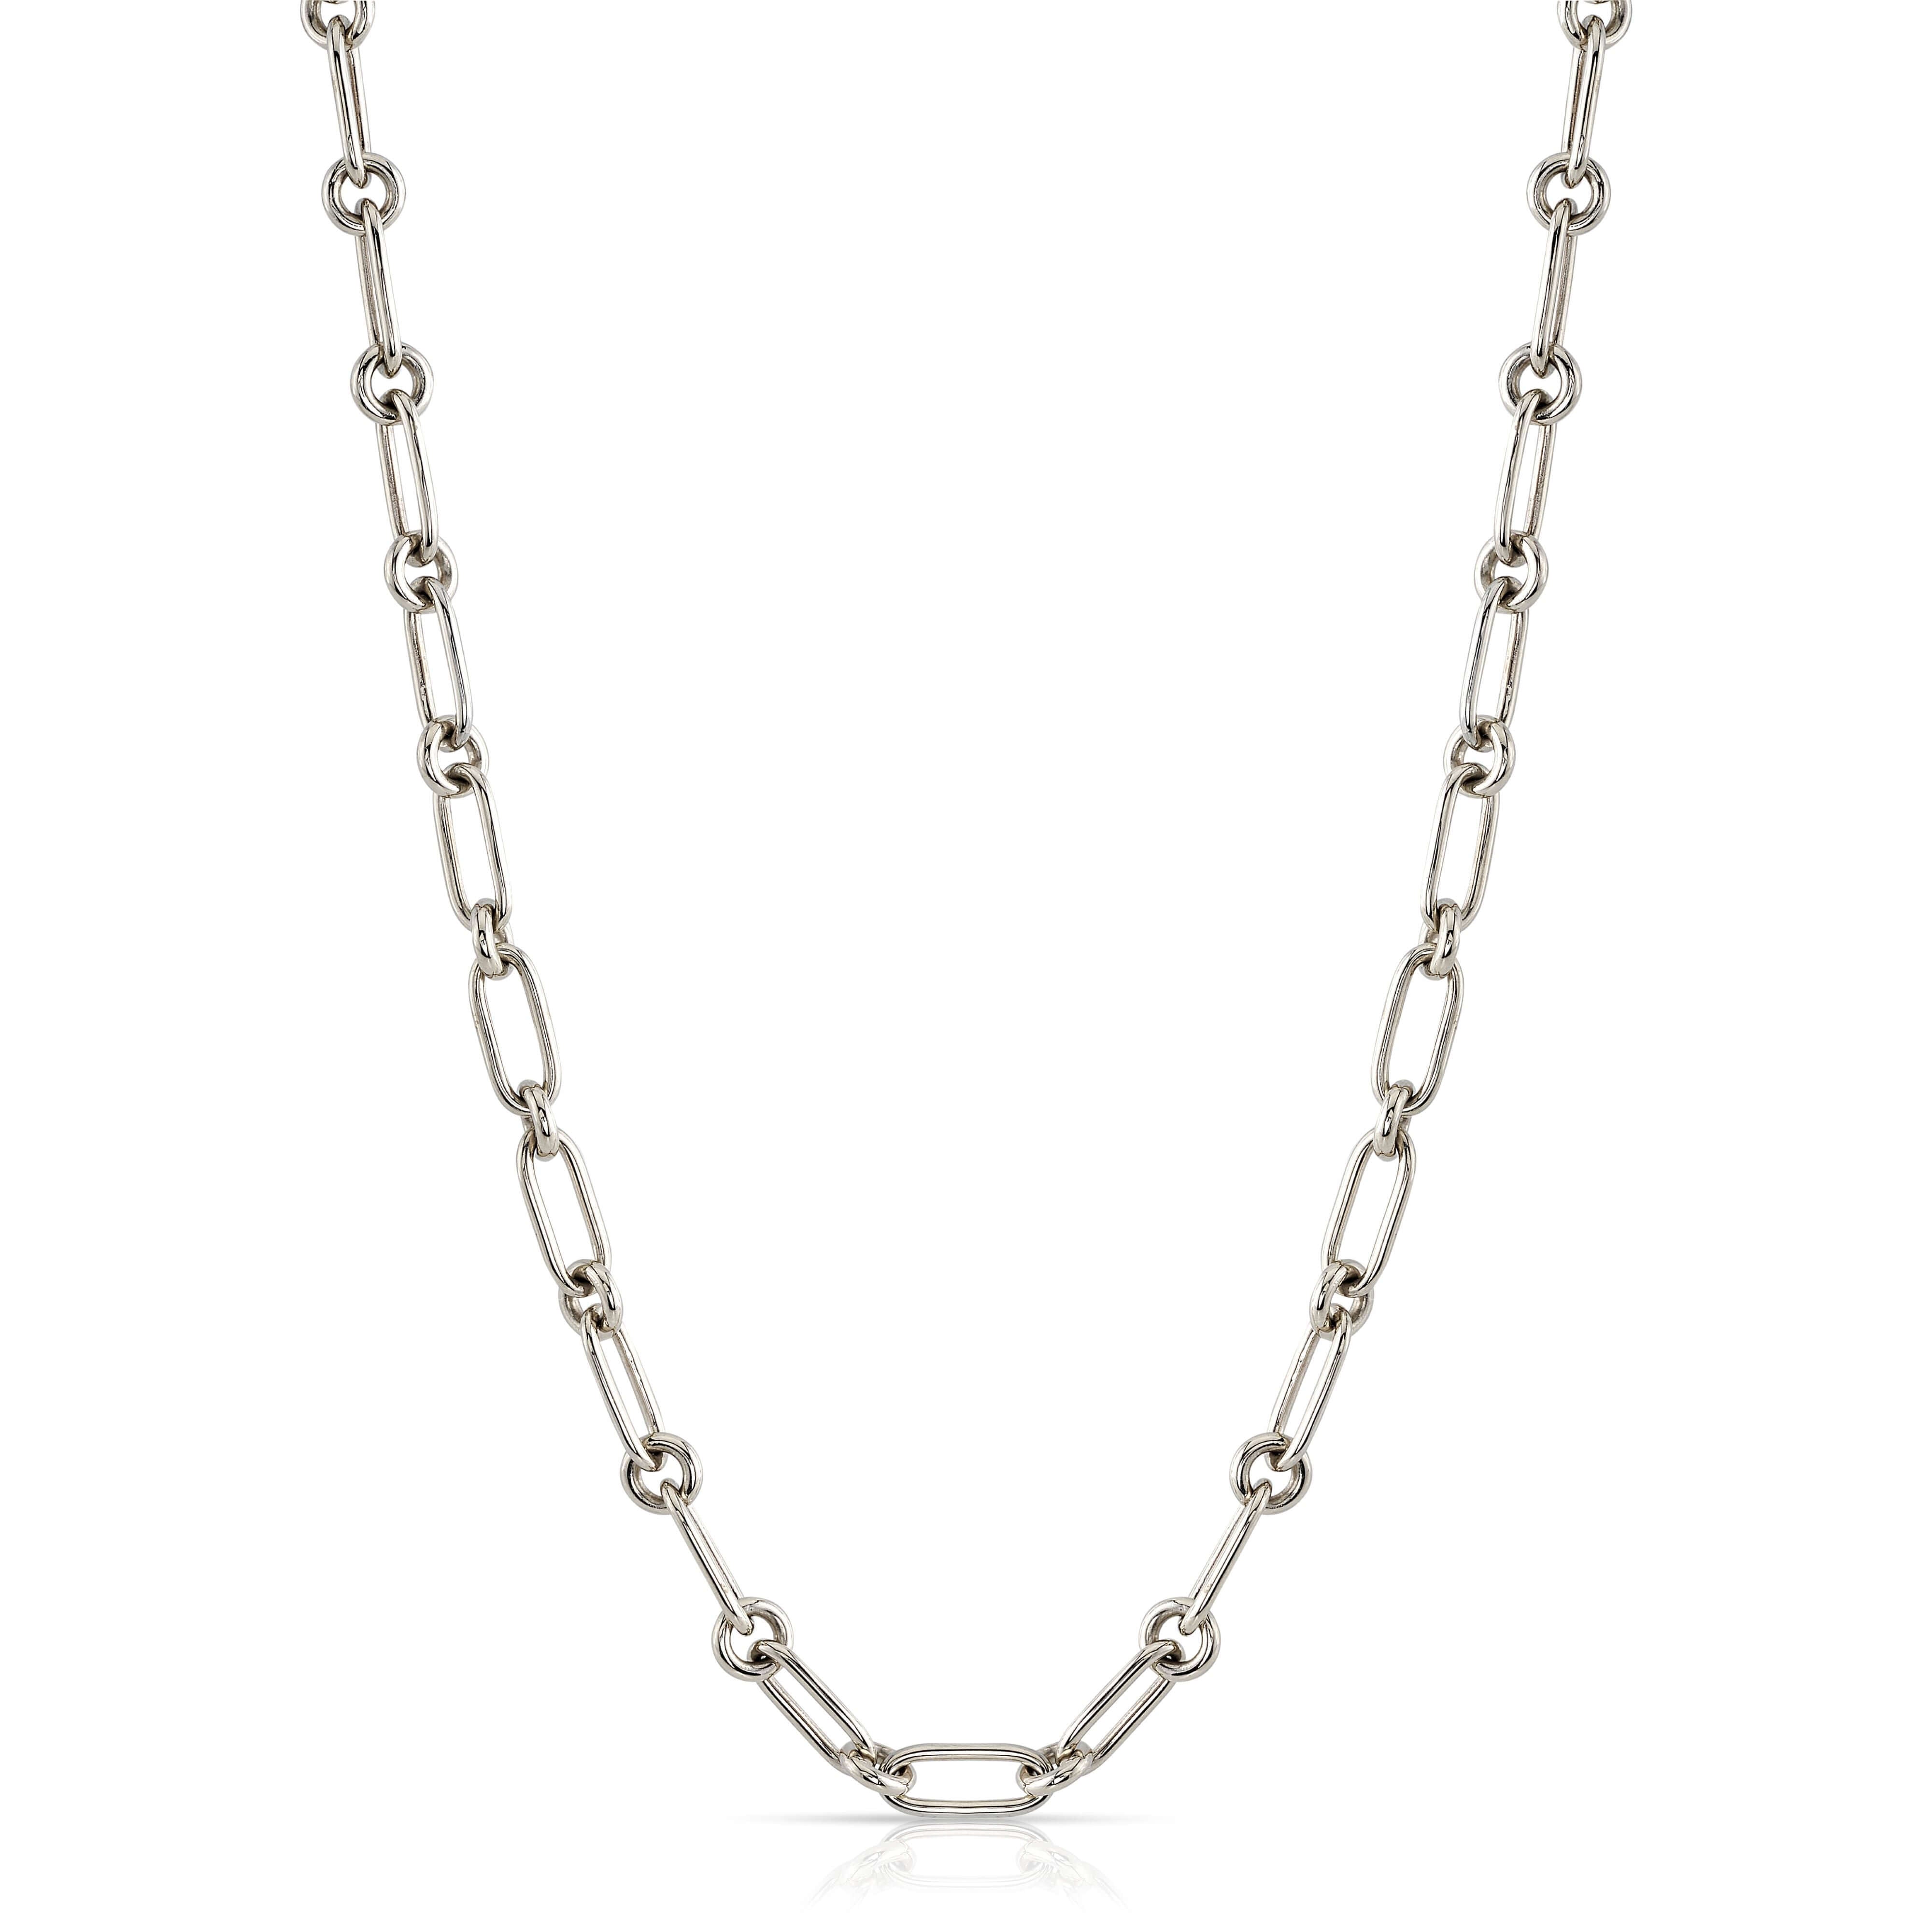 SINGLE STONE LO CHAIN featuring Handcrafted 18K gold long and round link necklace. Available in multiple lengths.